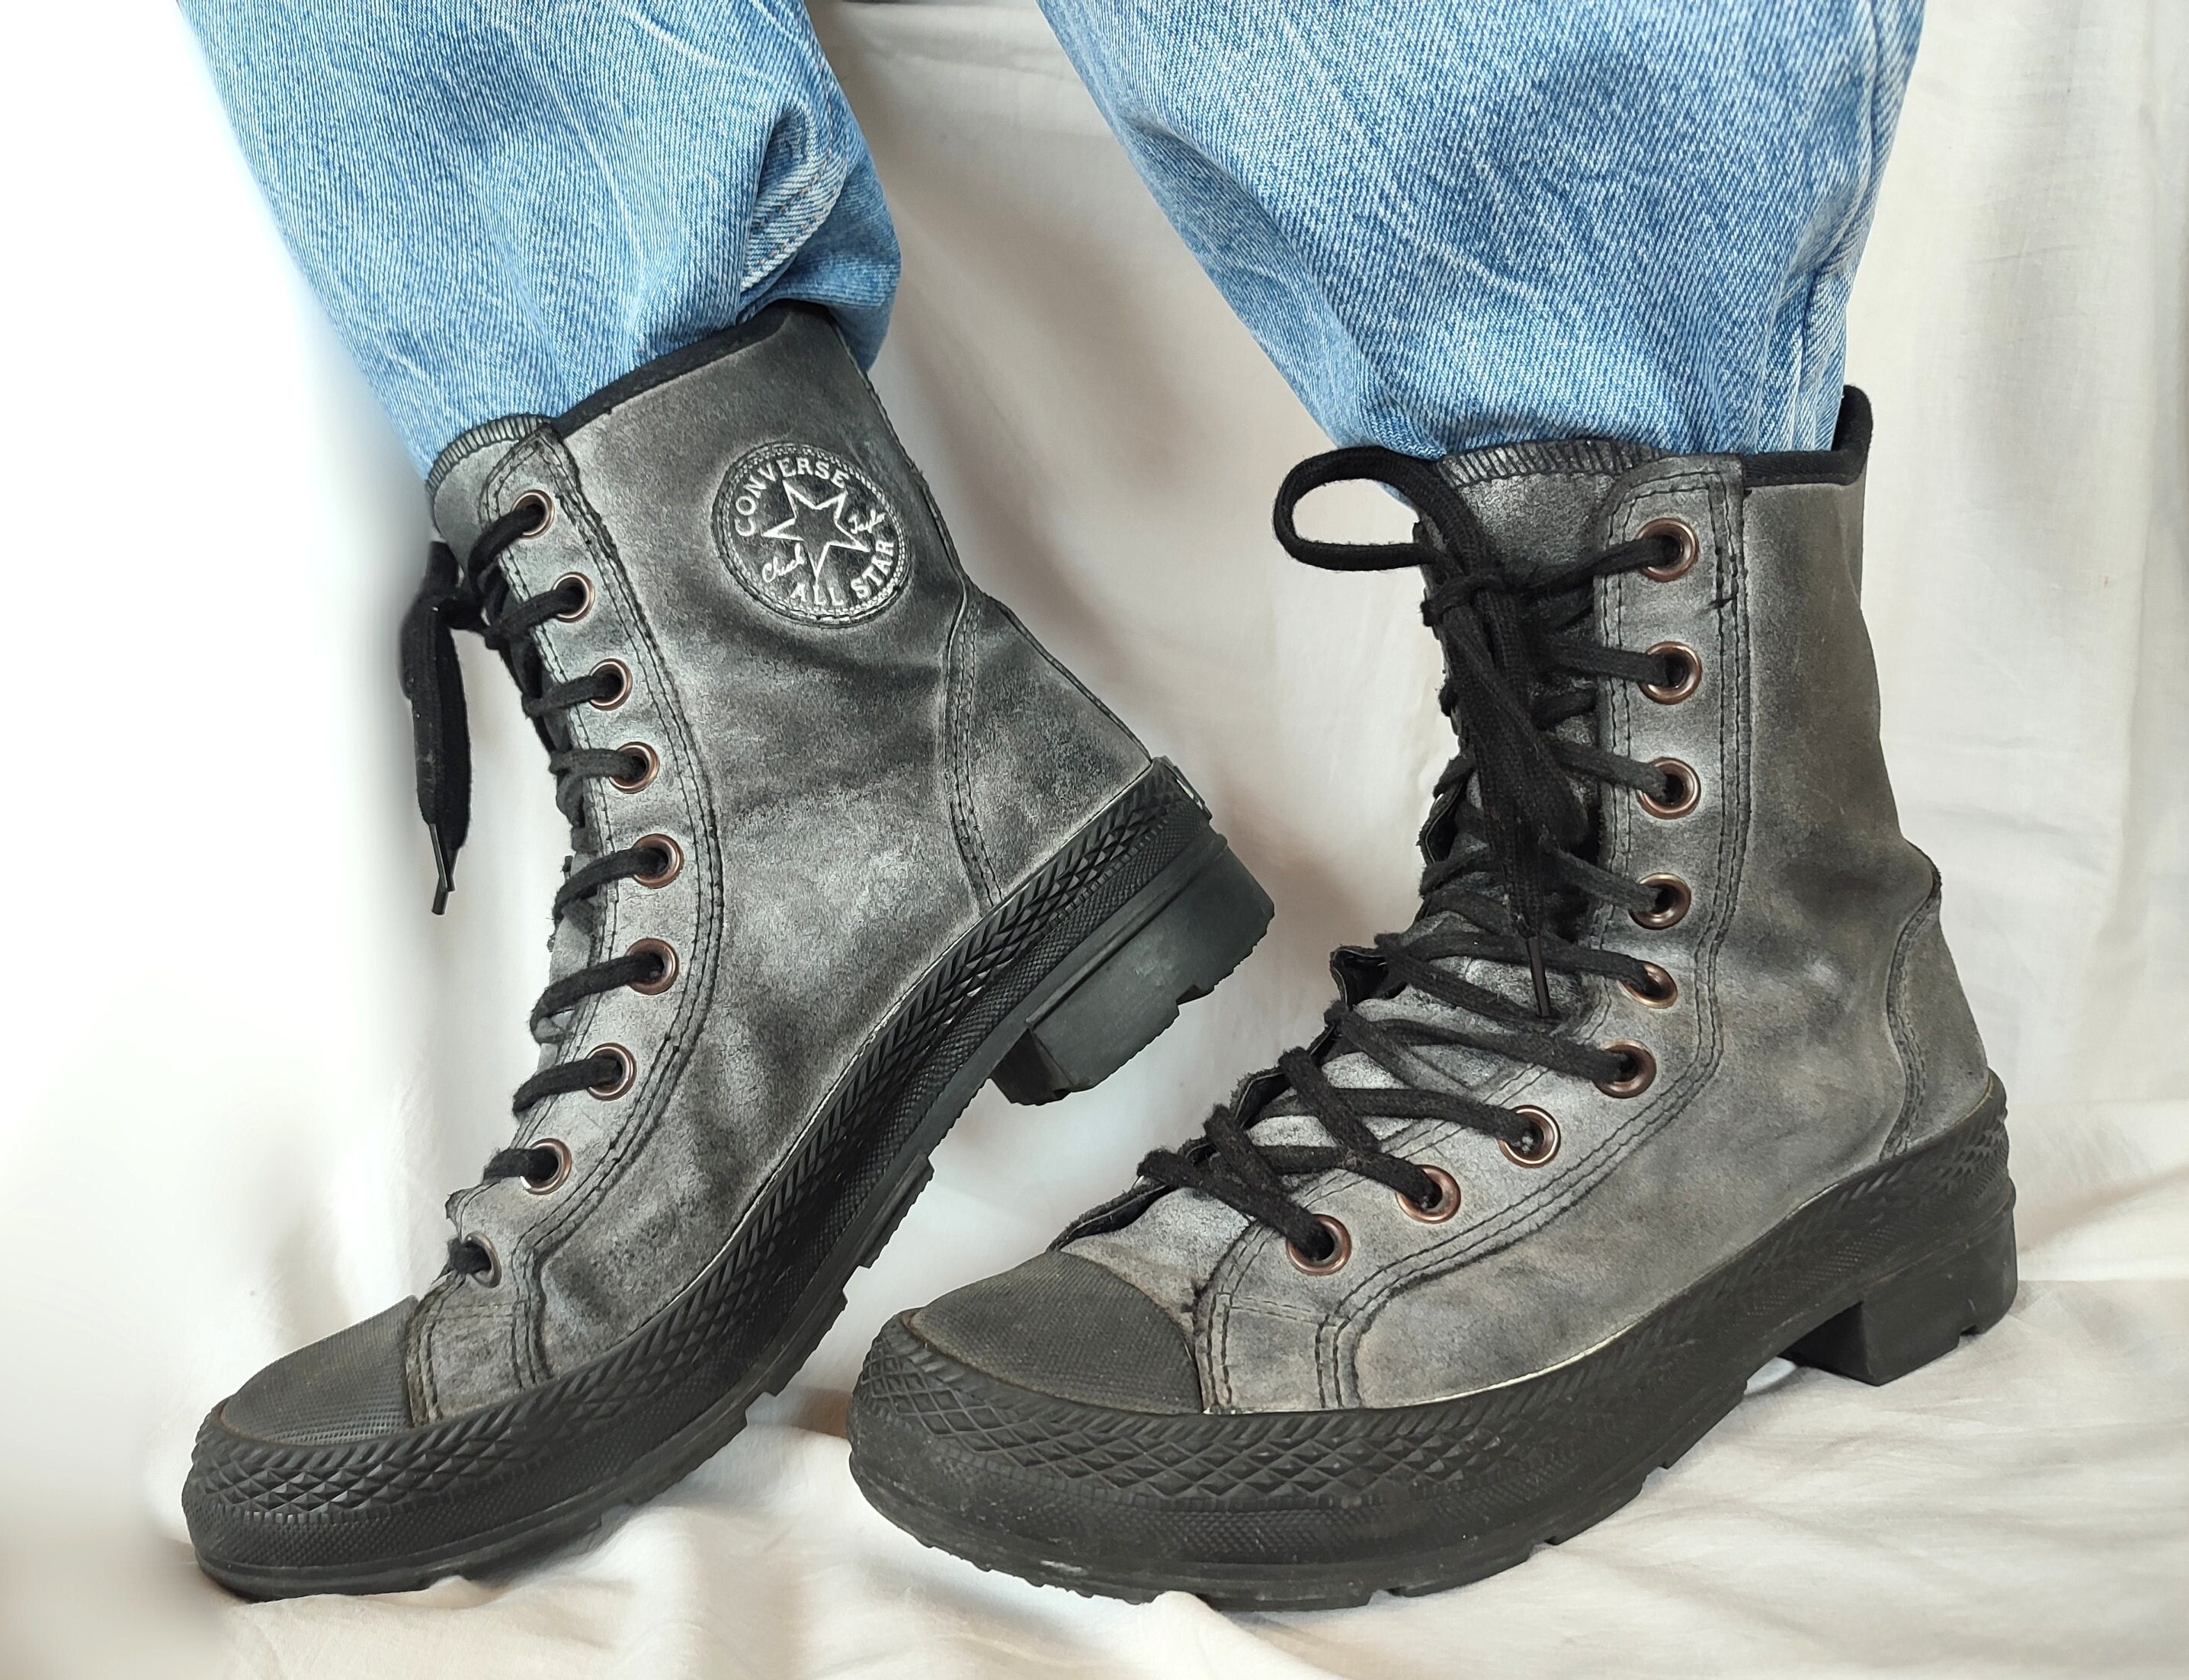 Vintage Converse Star High Tops Boots Chuck Taylor Gray -